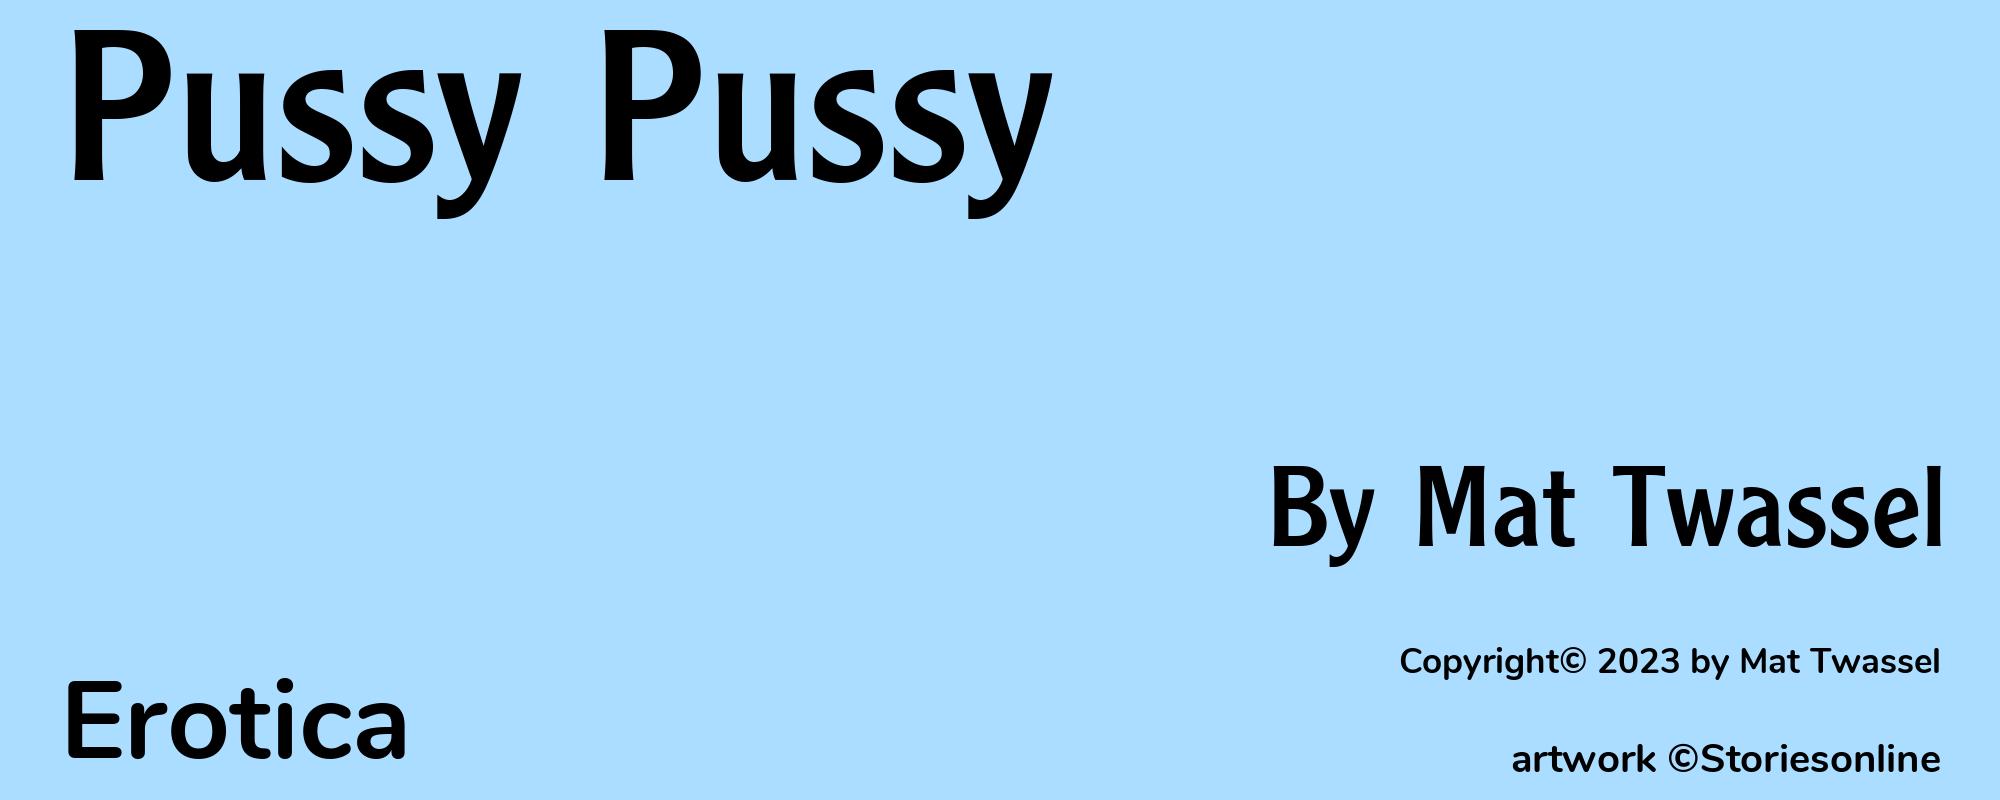 Pussy Pussy - Cover